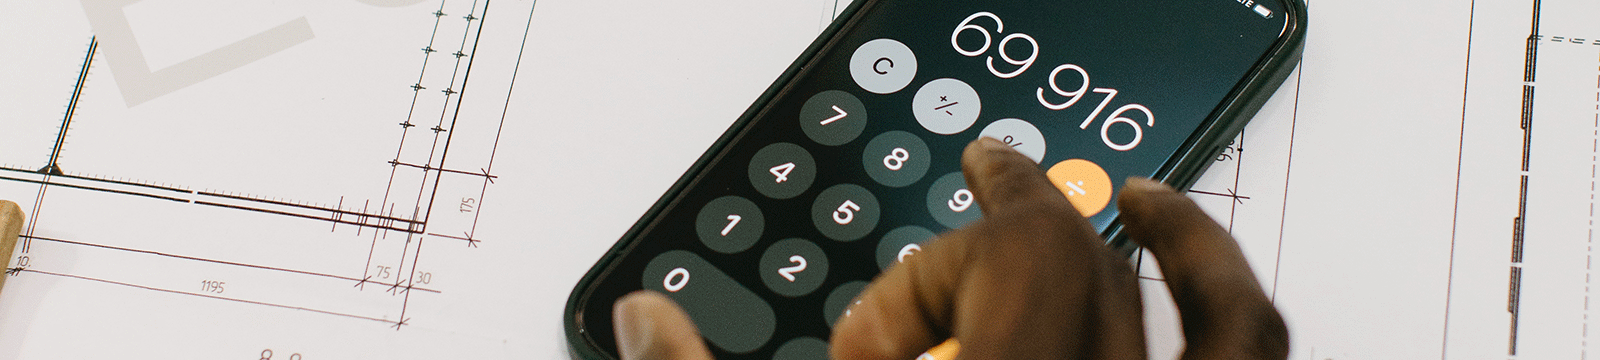 Close up of a person using an iphone calculator sitting on blueprints.